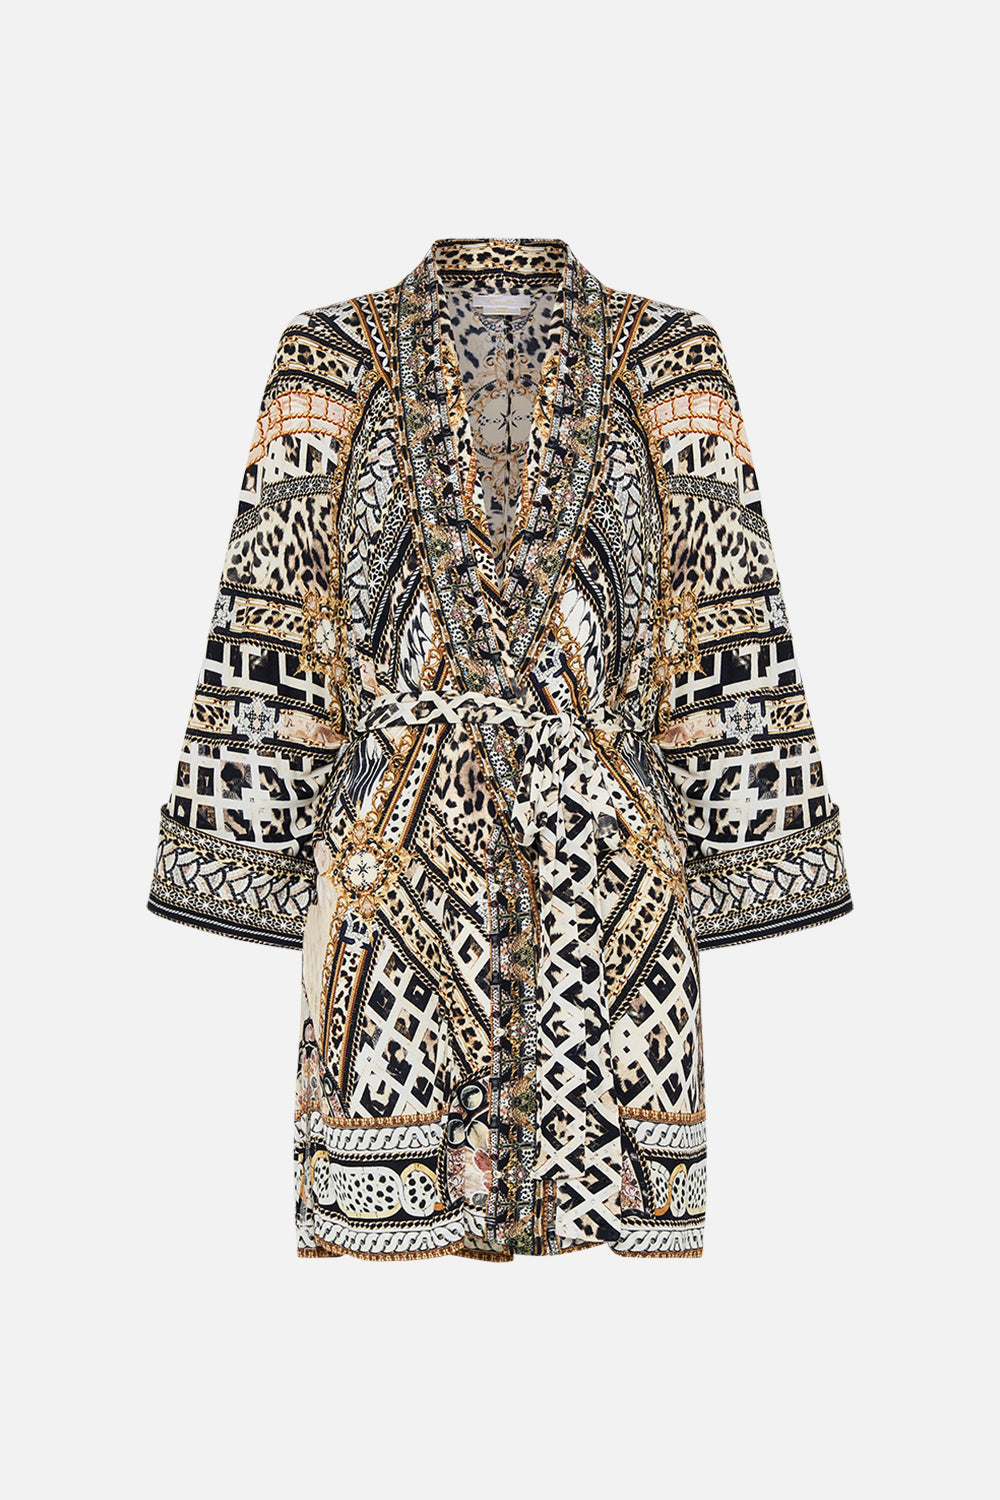 Product view of CAMILLA animal print robe in Mosaic Muse 